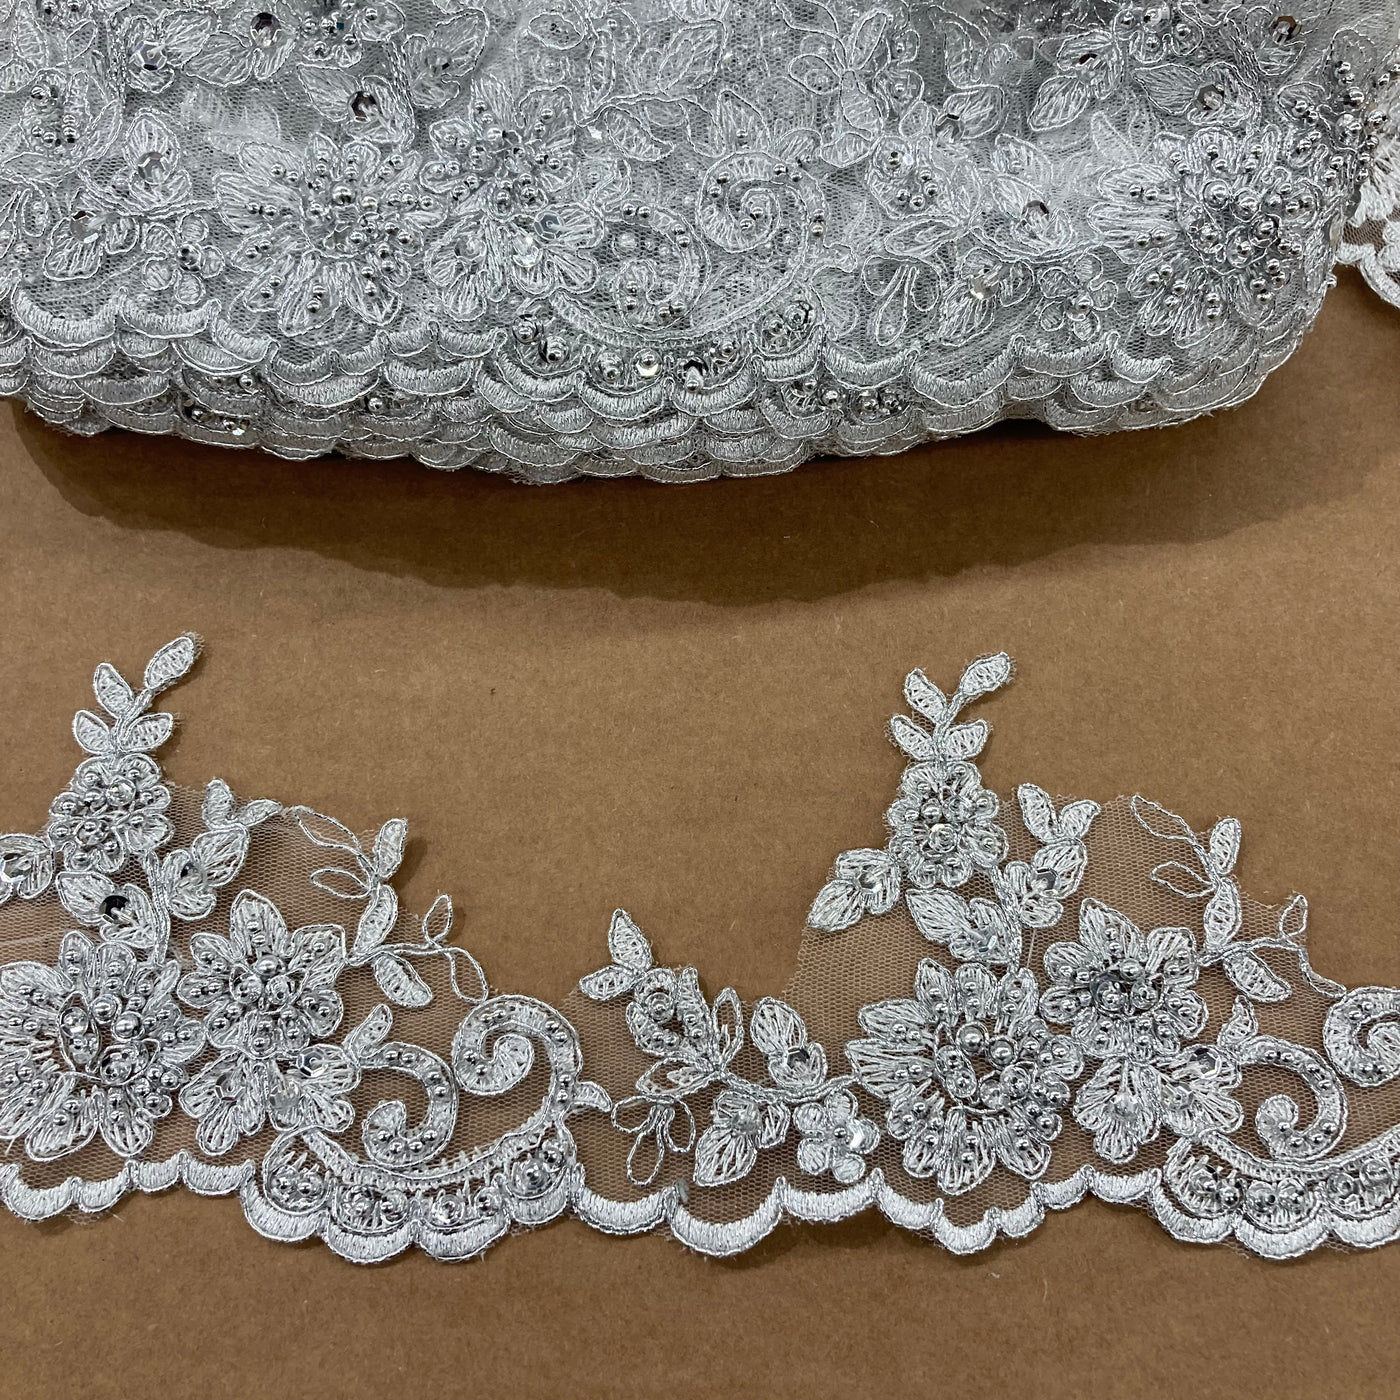 Beaded, Corded & Embroidered Trimming. Lace Usa